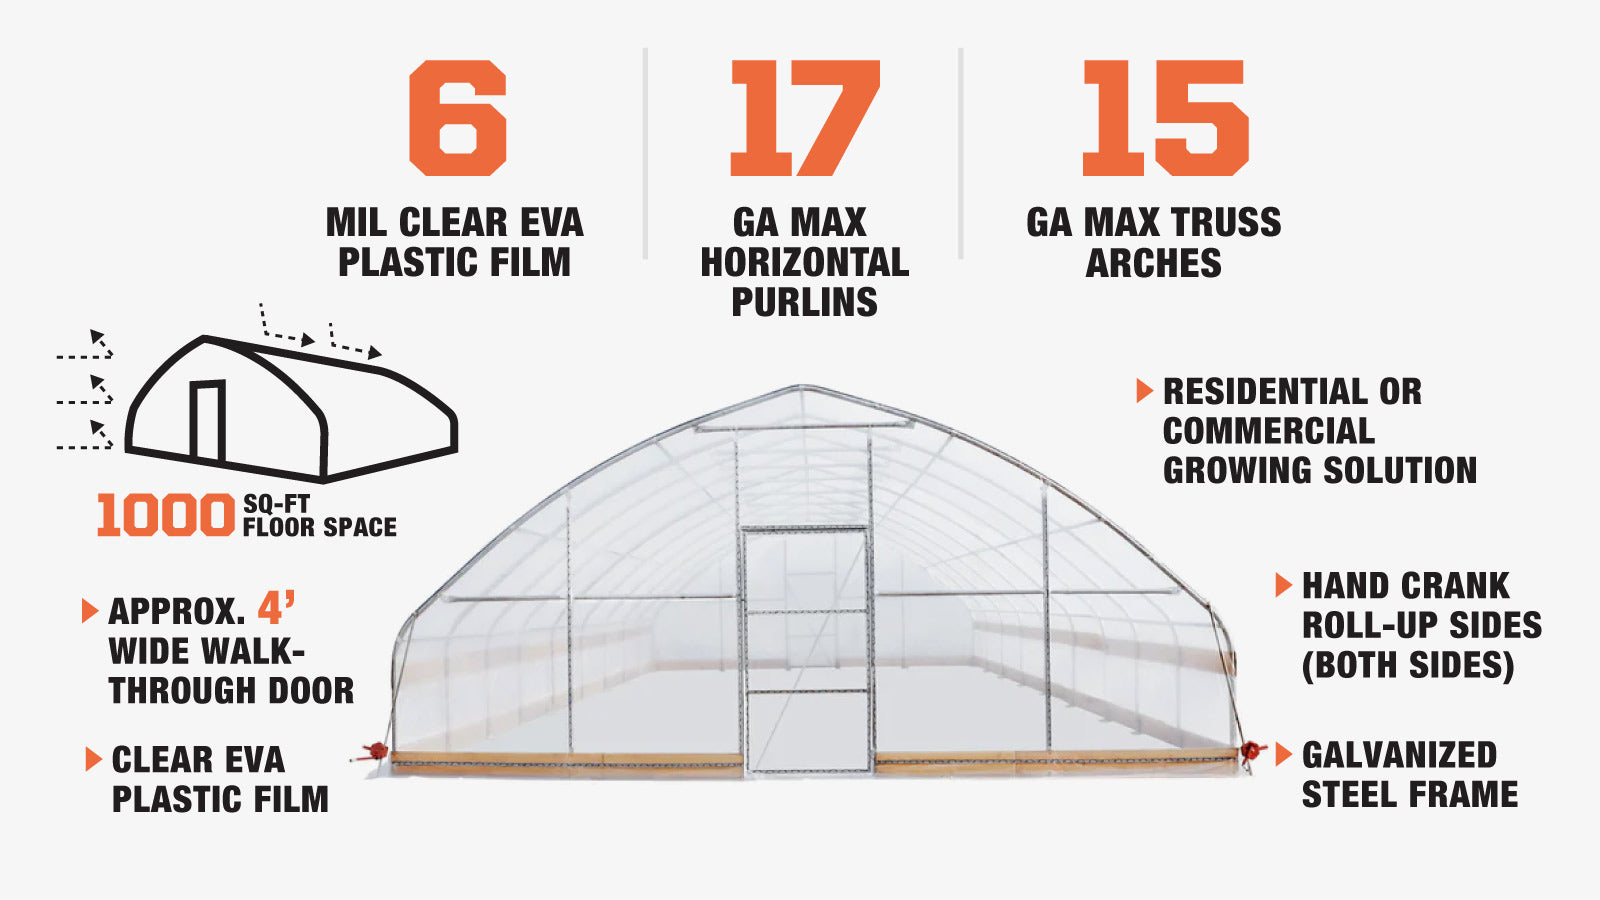 TMG Industrial 25’ x 40’ Tunnel Greenhouse Grow Tent w/6 Mil Clear EVA Plastic Film, Cold Frame, Hand Crank Roll-Up Sides, Peak Ceiling Roof, TMG-GH2540-description-image